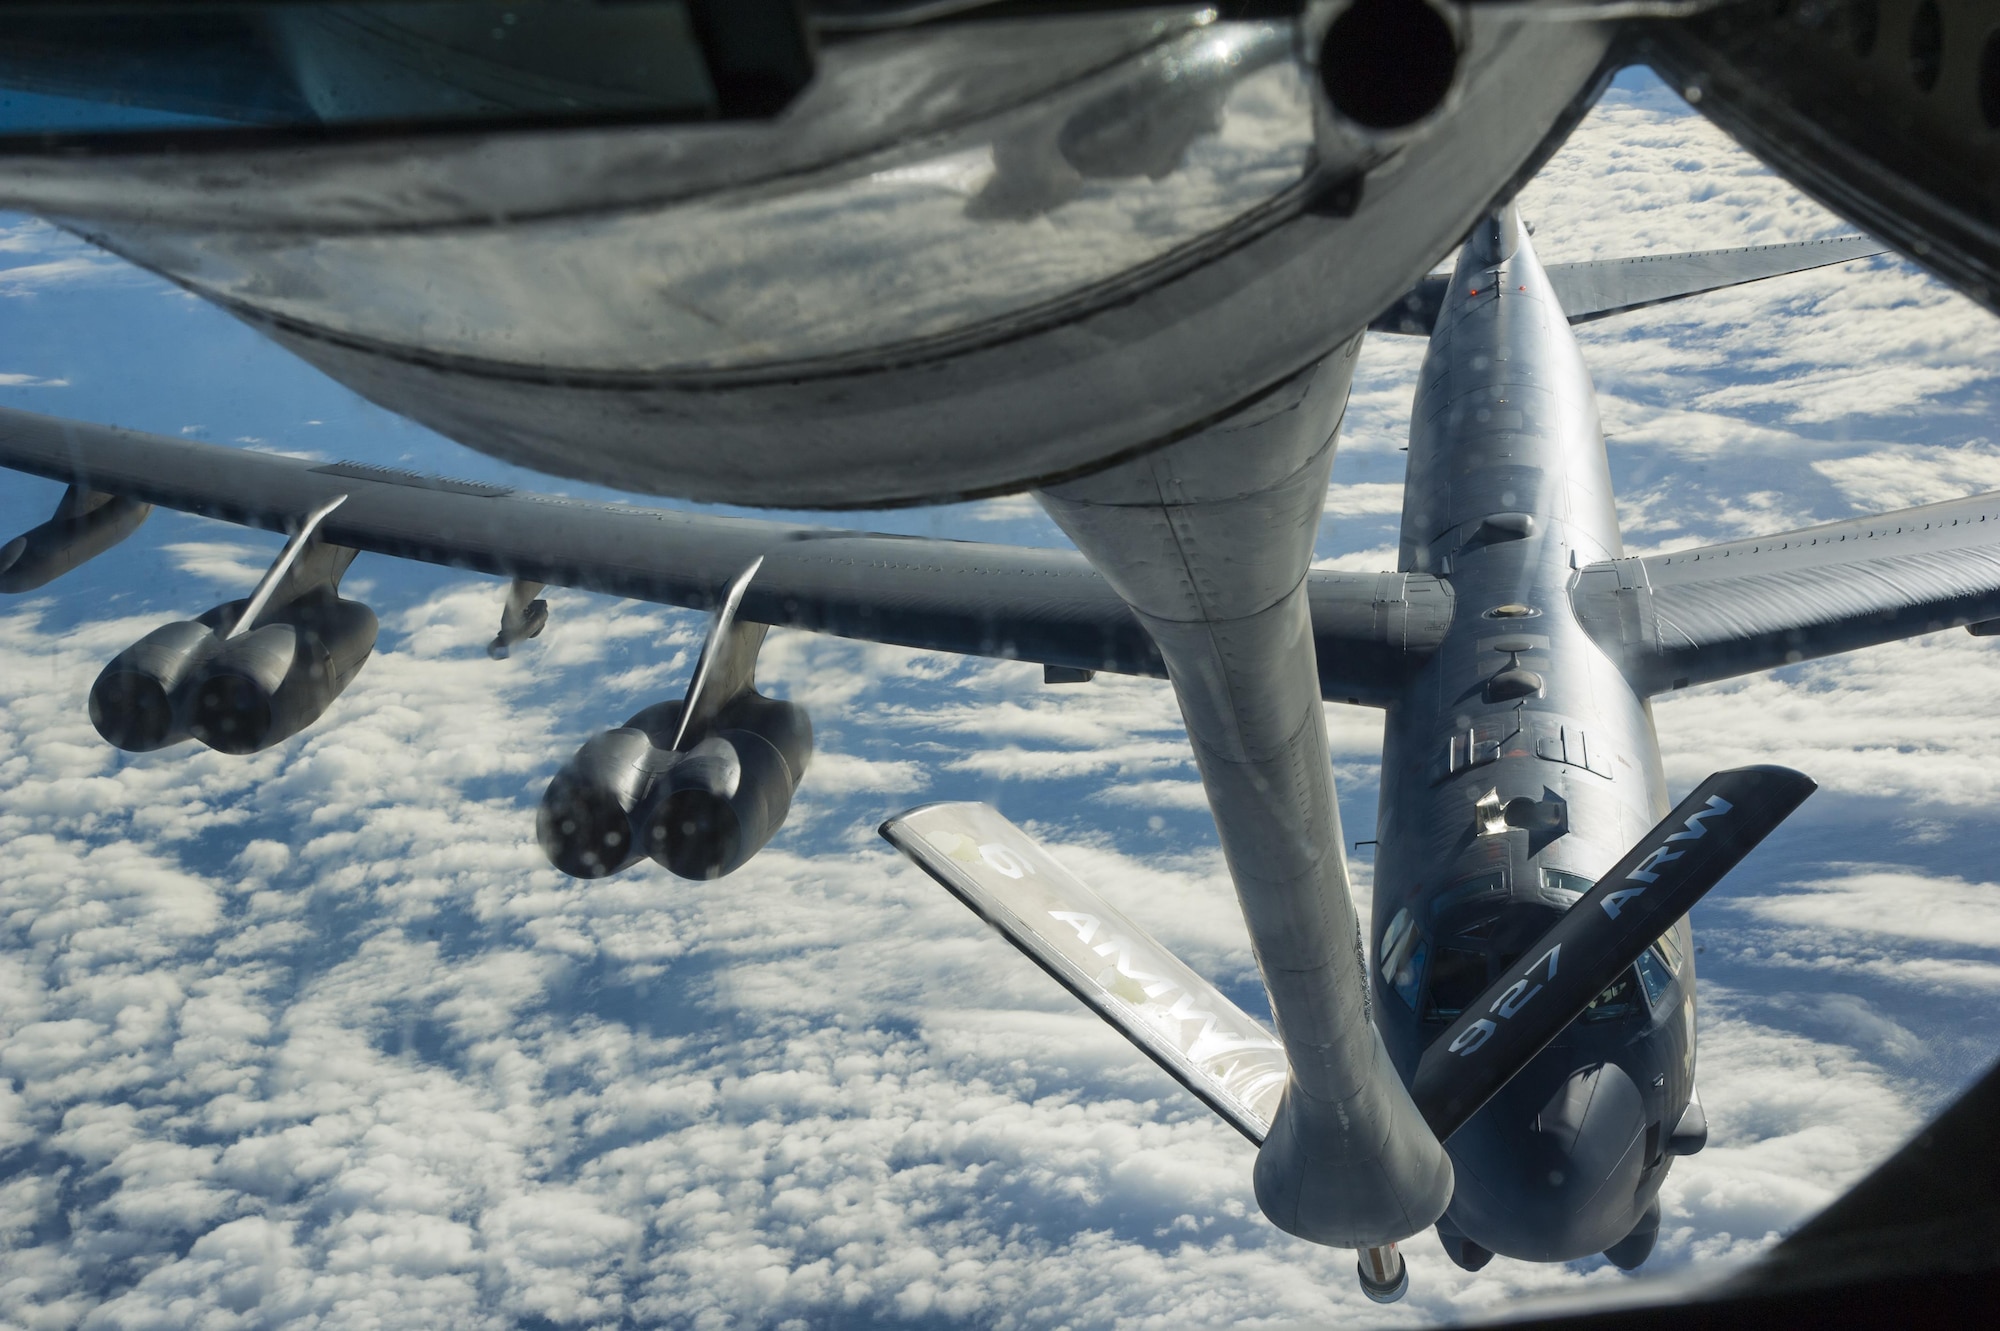 A KC-135 Stratotanker prepares to refuel a B-52 Stratofortress in midair over the United States Oct. 30, 2016, as part of Exercise Global Thunder. Exercise Global Thunder provides training opportunities for USSTRATCOM components, task forces, units and command posts to deter and, if necessary, defeat a military attack against the United States and to employ forces as directed by the President.This tanker refueled two B-52s on this mission. (U.S. Air Force photo/Tech. Sgt. Travis Edwards)